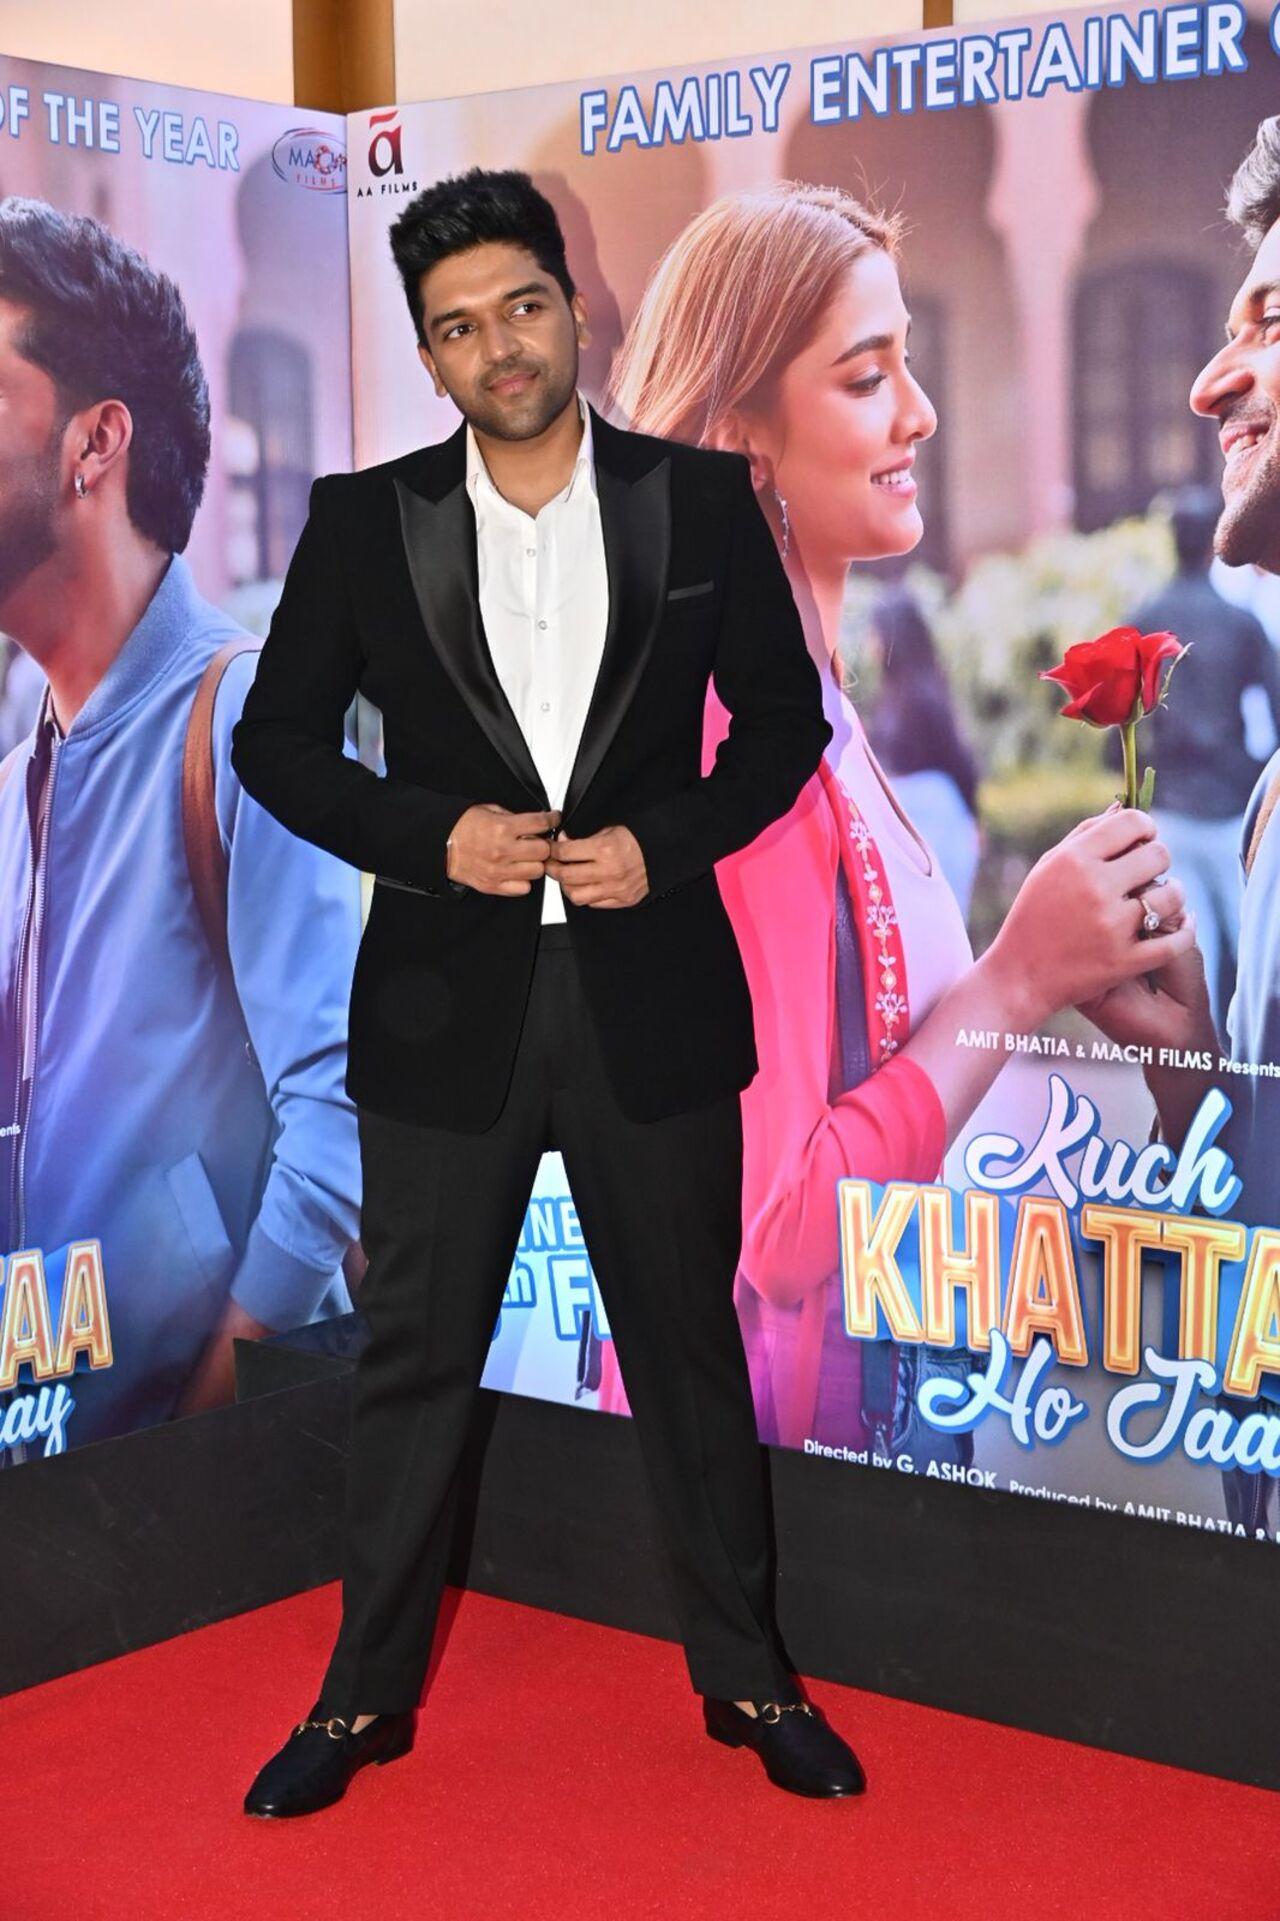 Guru Randhawa opted for the classy black three-piece suit for the premiere of his debut Bollywood film, Kuch Khatta Ho Jaay